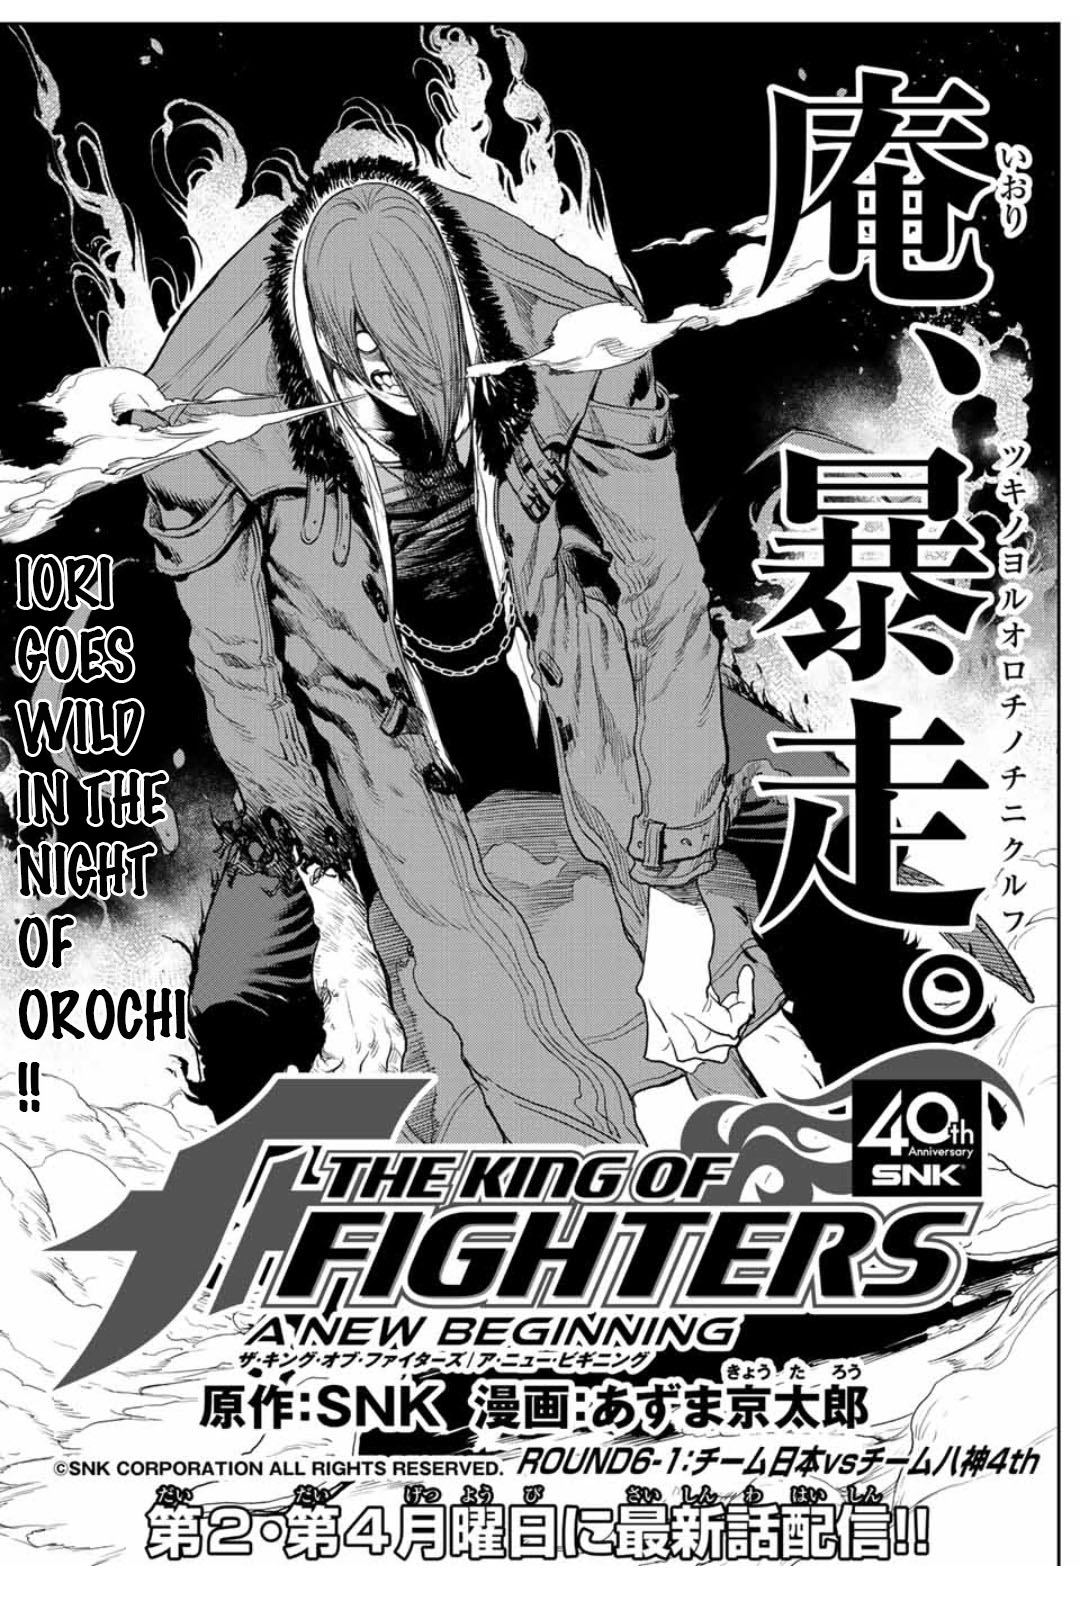 The King of Fighters: A New Beginning Vol. 2 Ch. 6.1 Team Japan vs Team Yagami 4th